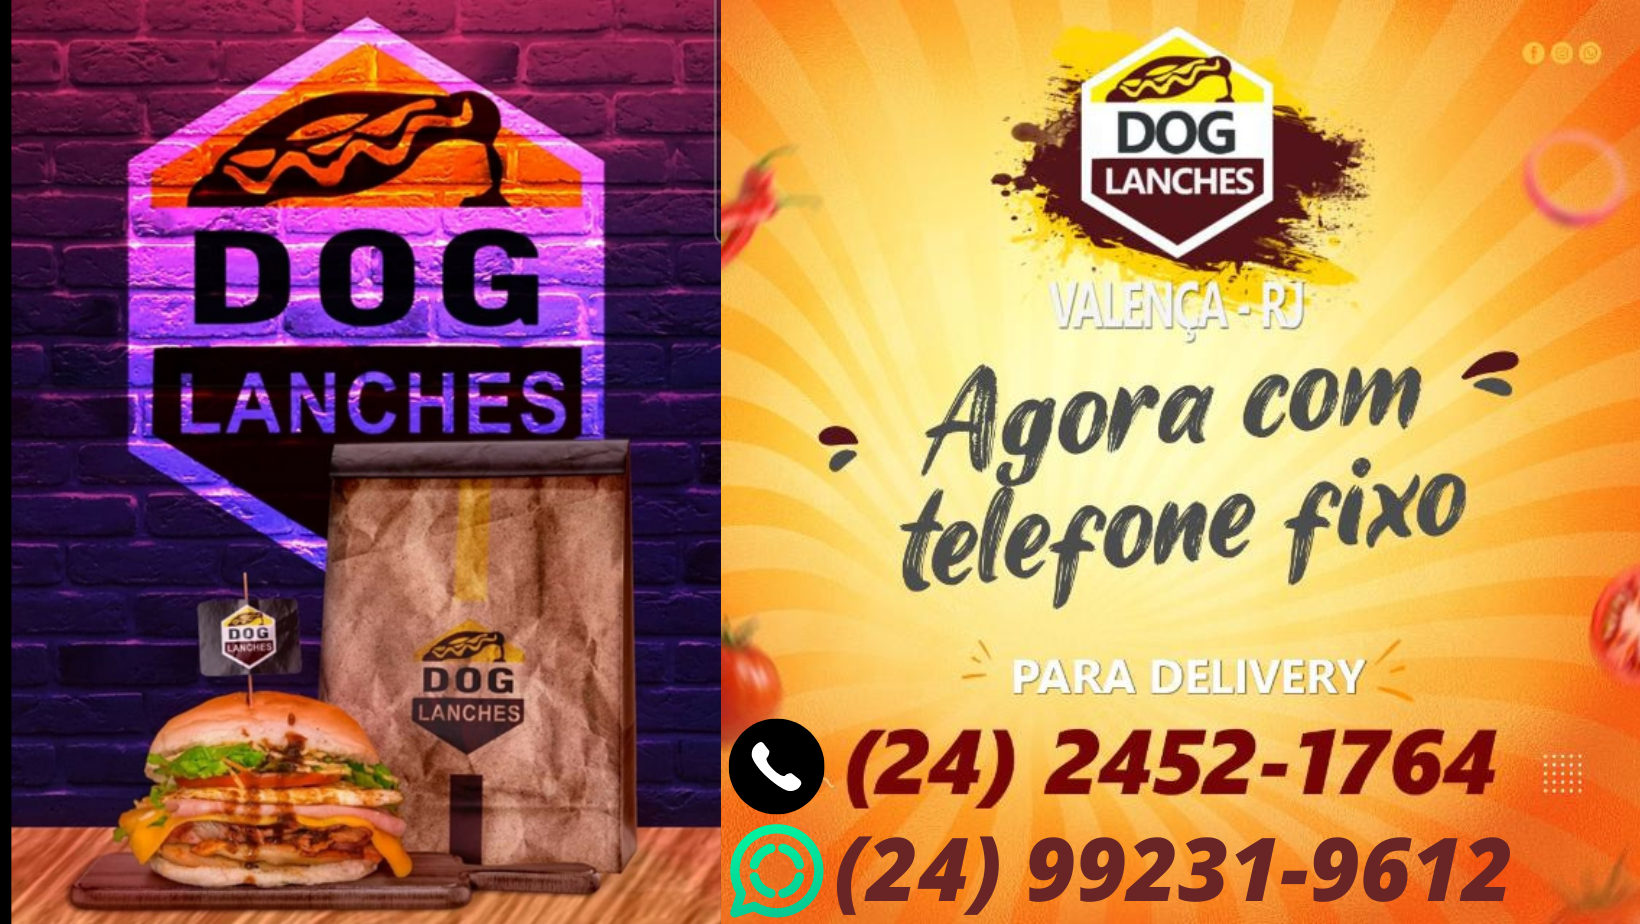 DOG LANCHES aaa